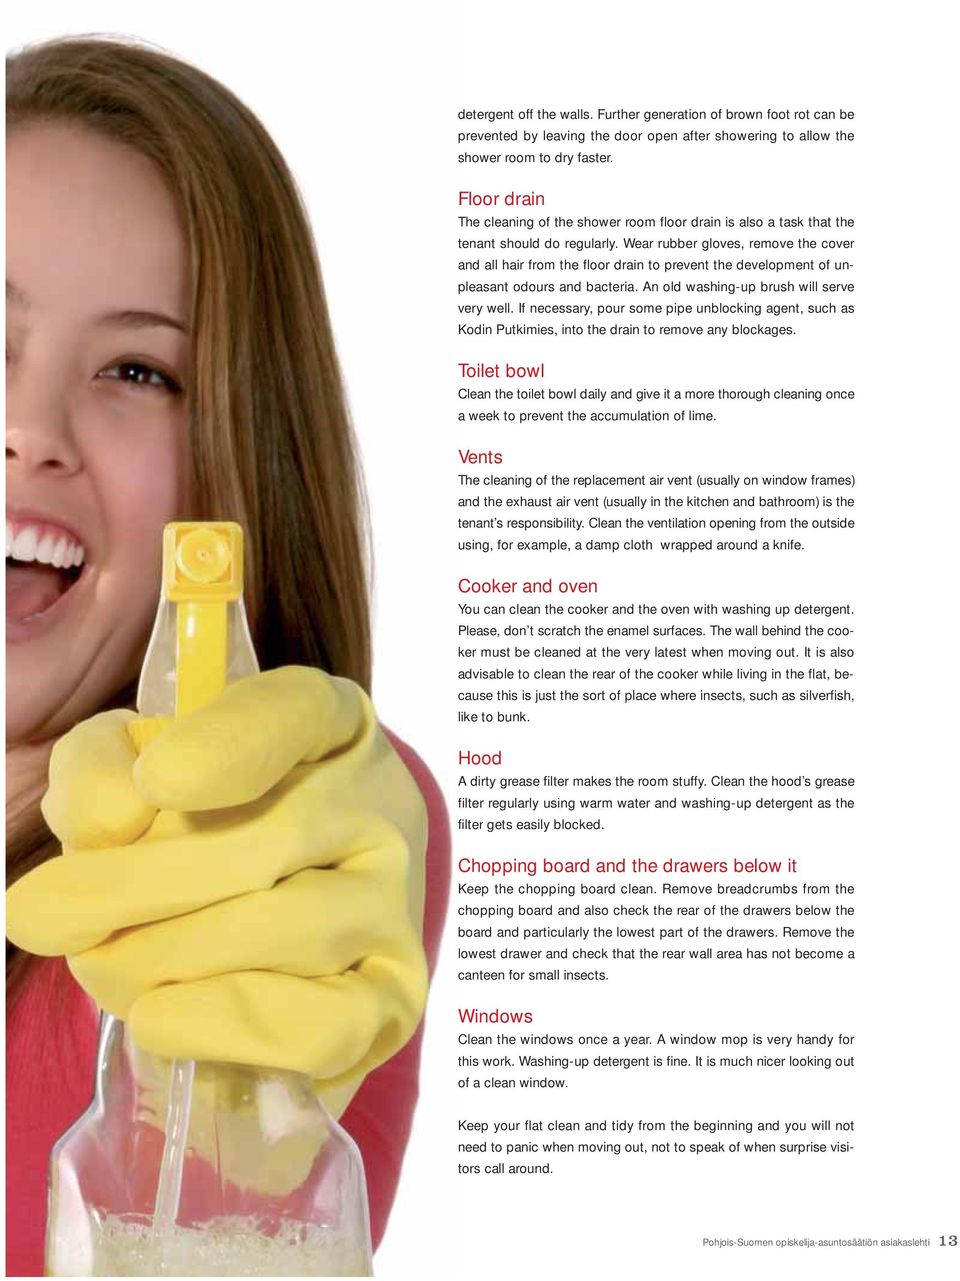 Wear rubber gloves, remove the cover and all hair from the floor drain to prevent the development of unpleasant odours and bacteria. An old washing-up brush will serve very well.